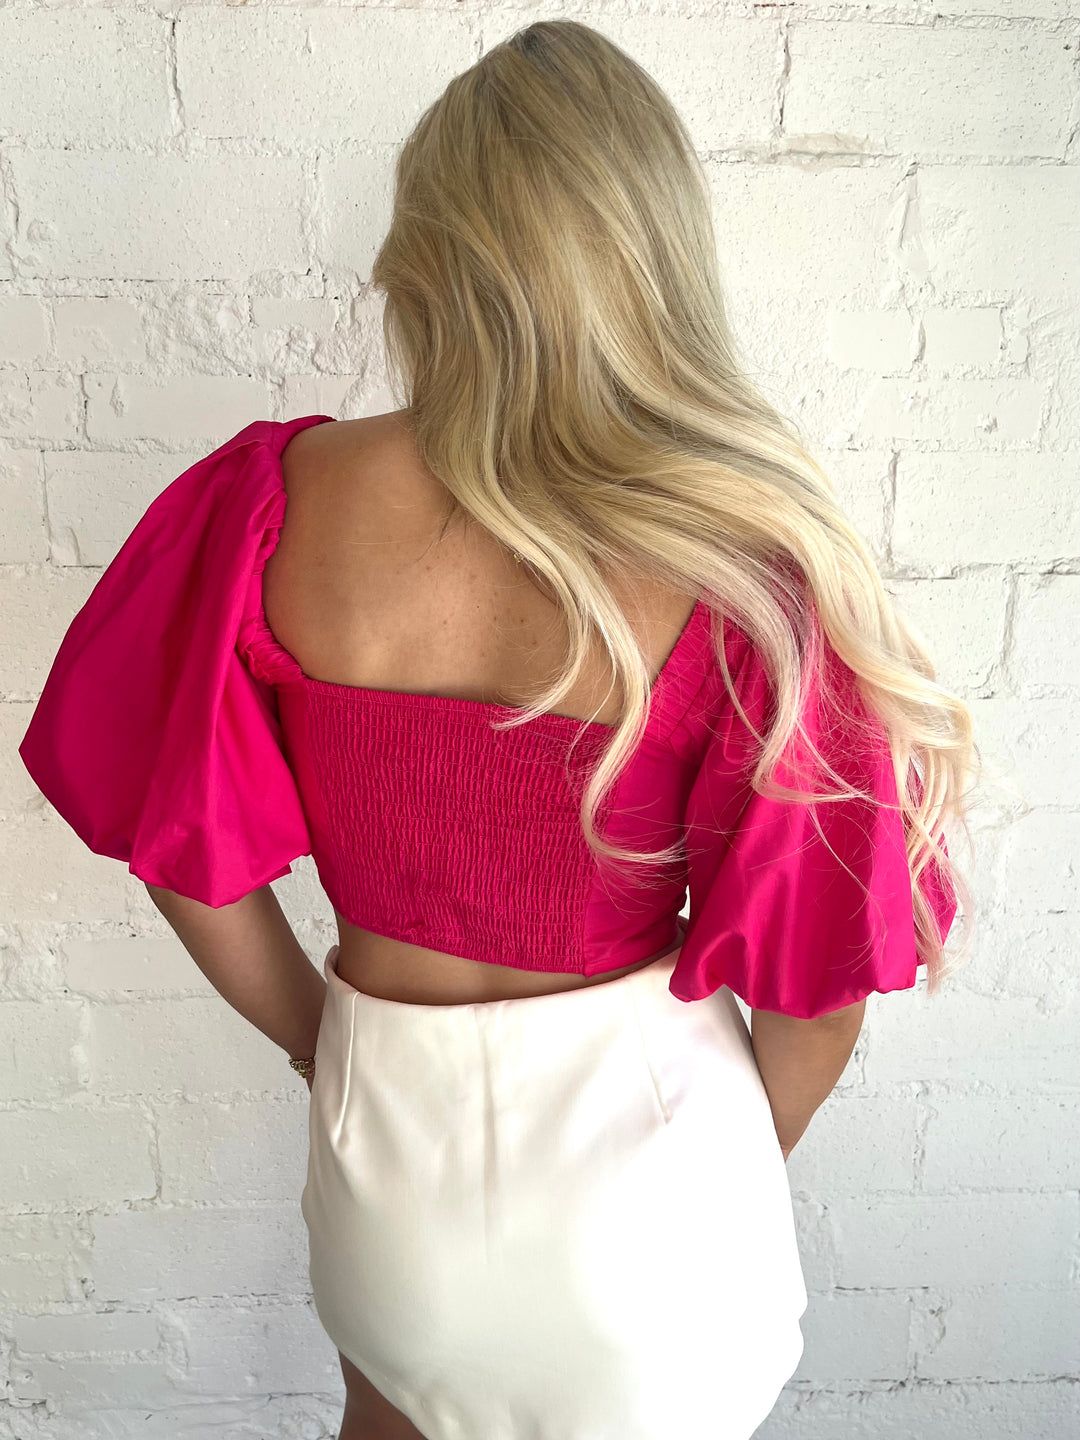 Sour Punch Ruched Top, Tops, Adeline, Adeline, dallas boutique, dallas texas, texas boutique, women's boutique dallas, adeline boutique, dallas boutique, trendy boutique, affordable boutique